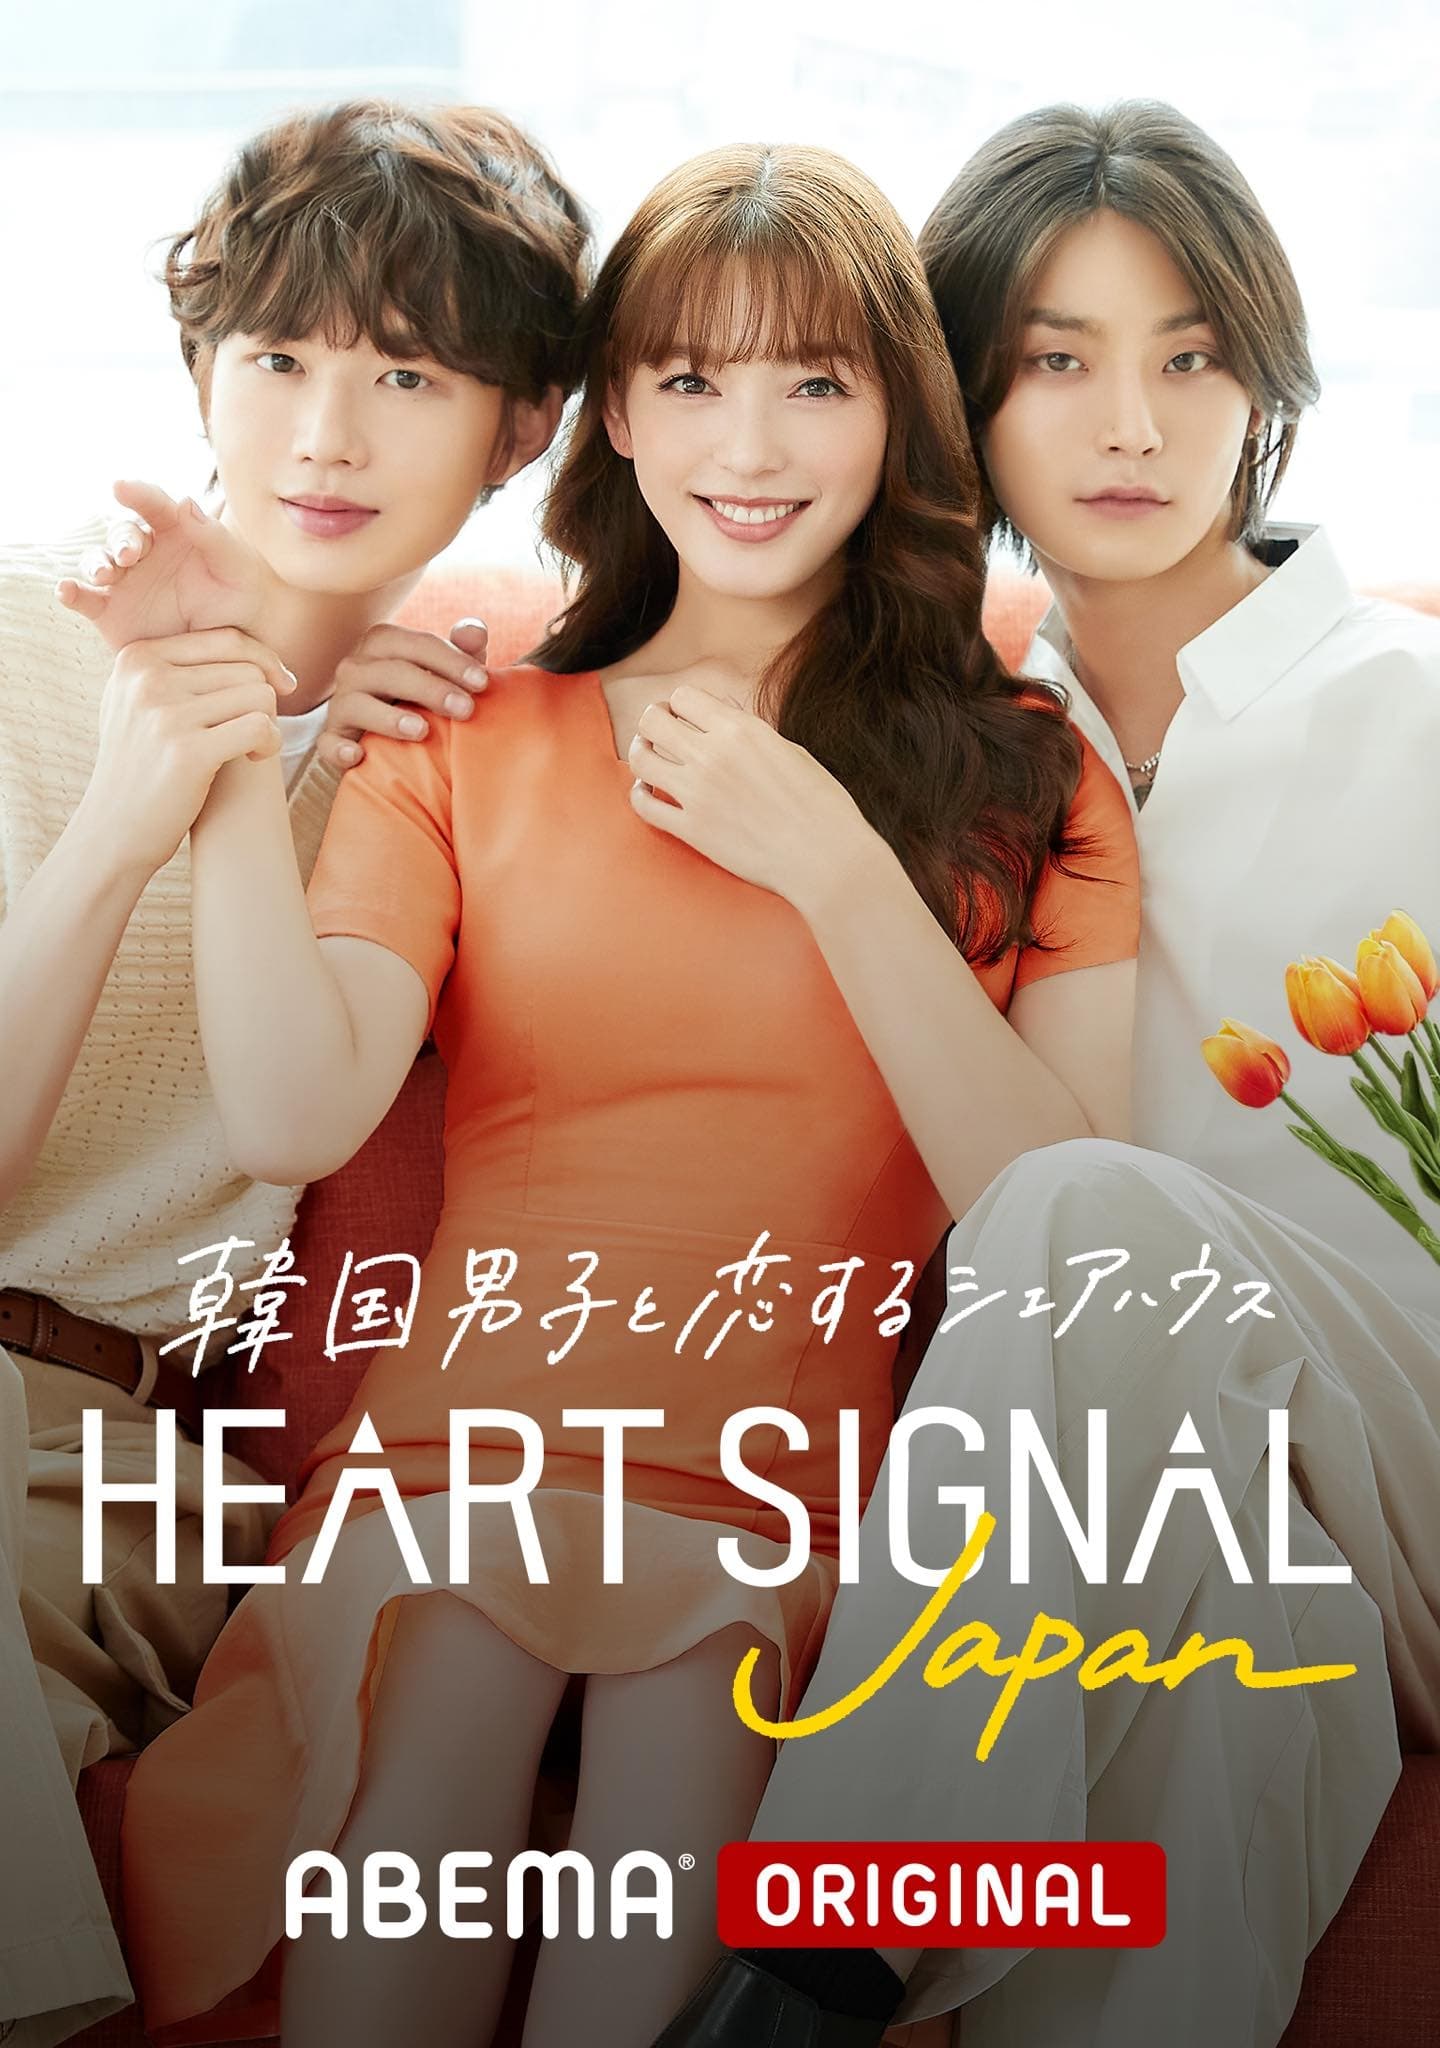 TV ratings for Heart Signal Japan in the United States. AbemaTV TV series